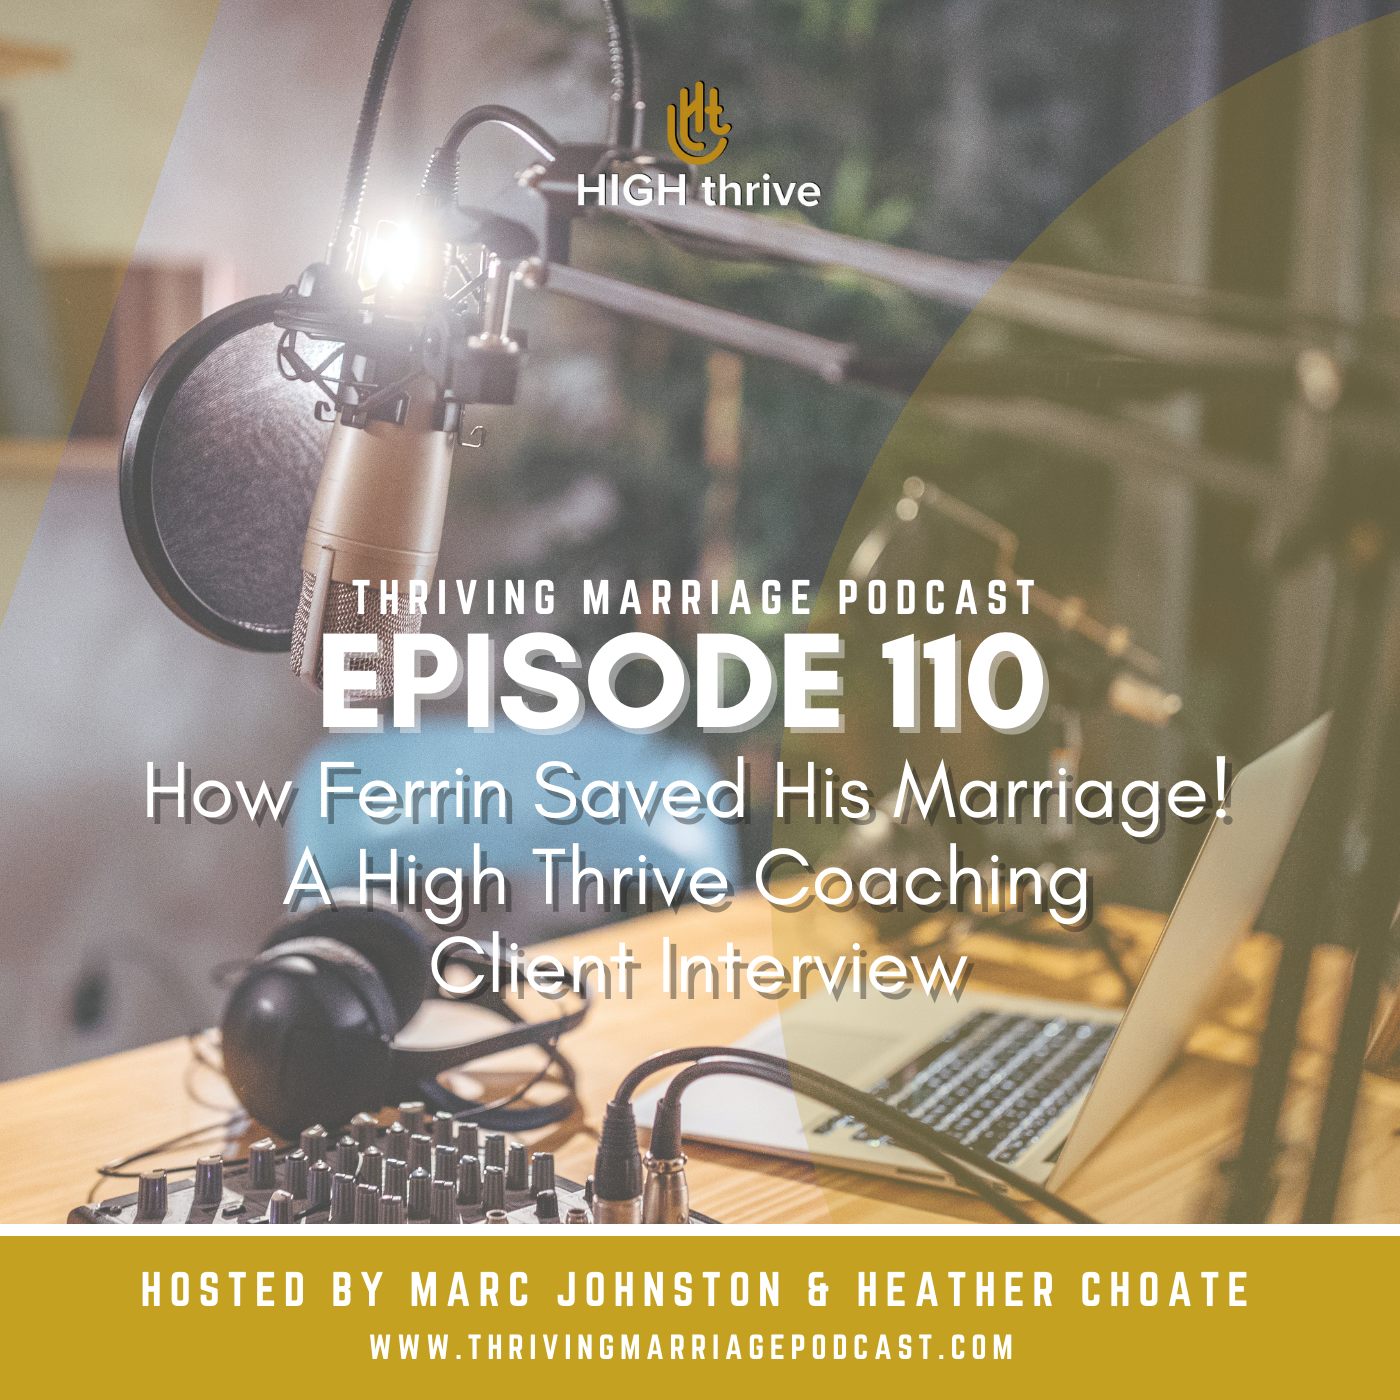 Episode 110: How Ferrin Saved His Marriage! - A High Thrive Coaching Client Interview